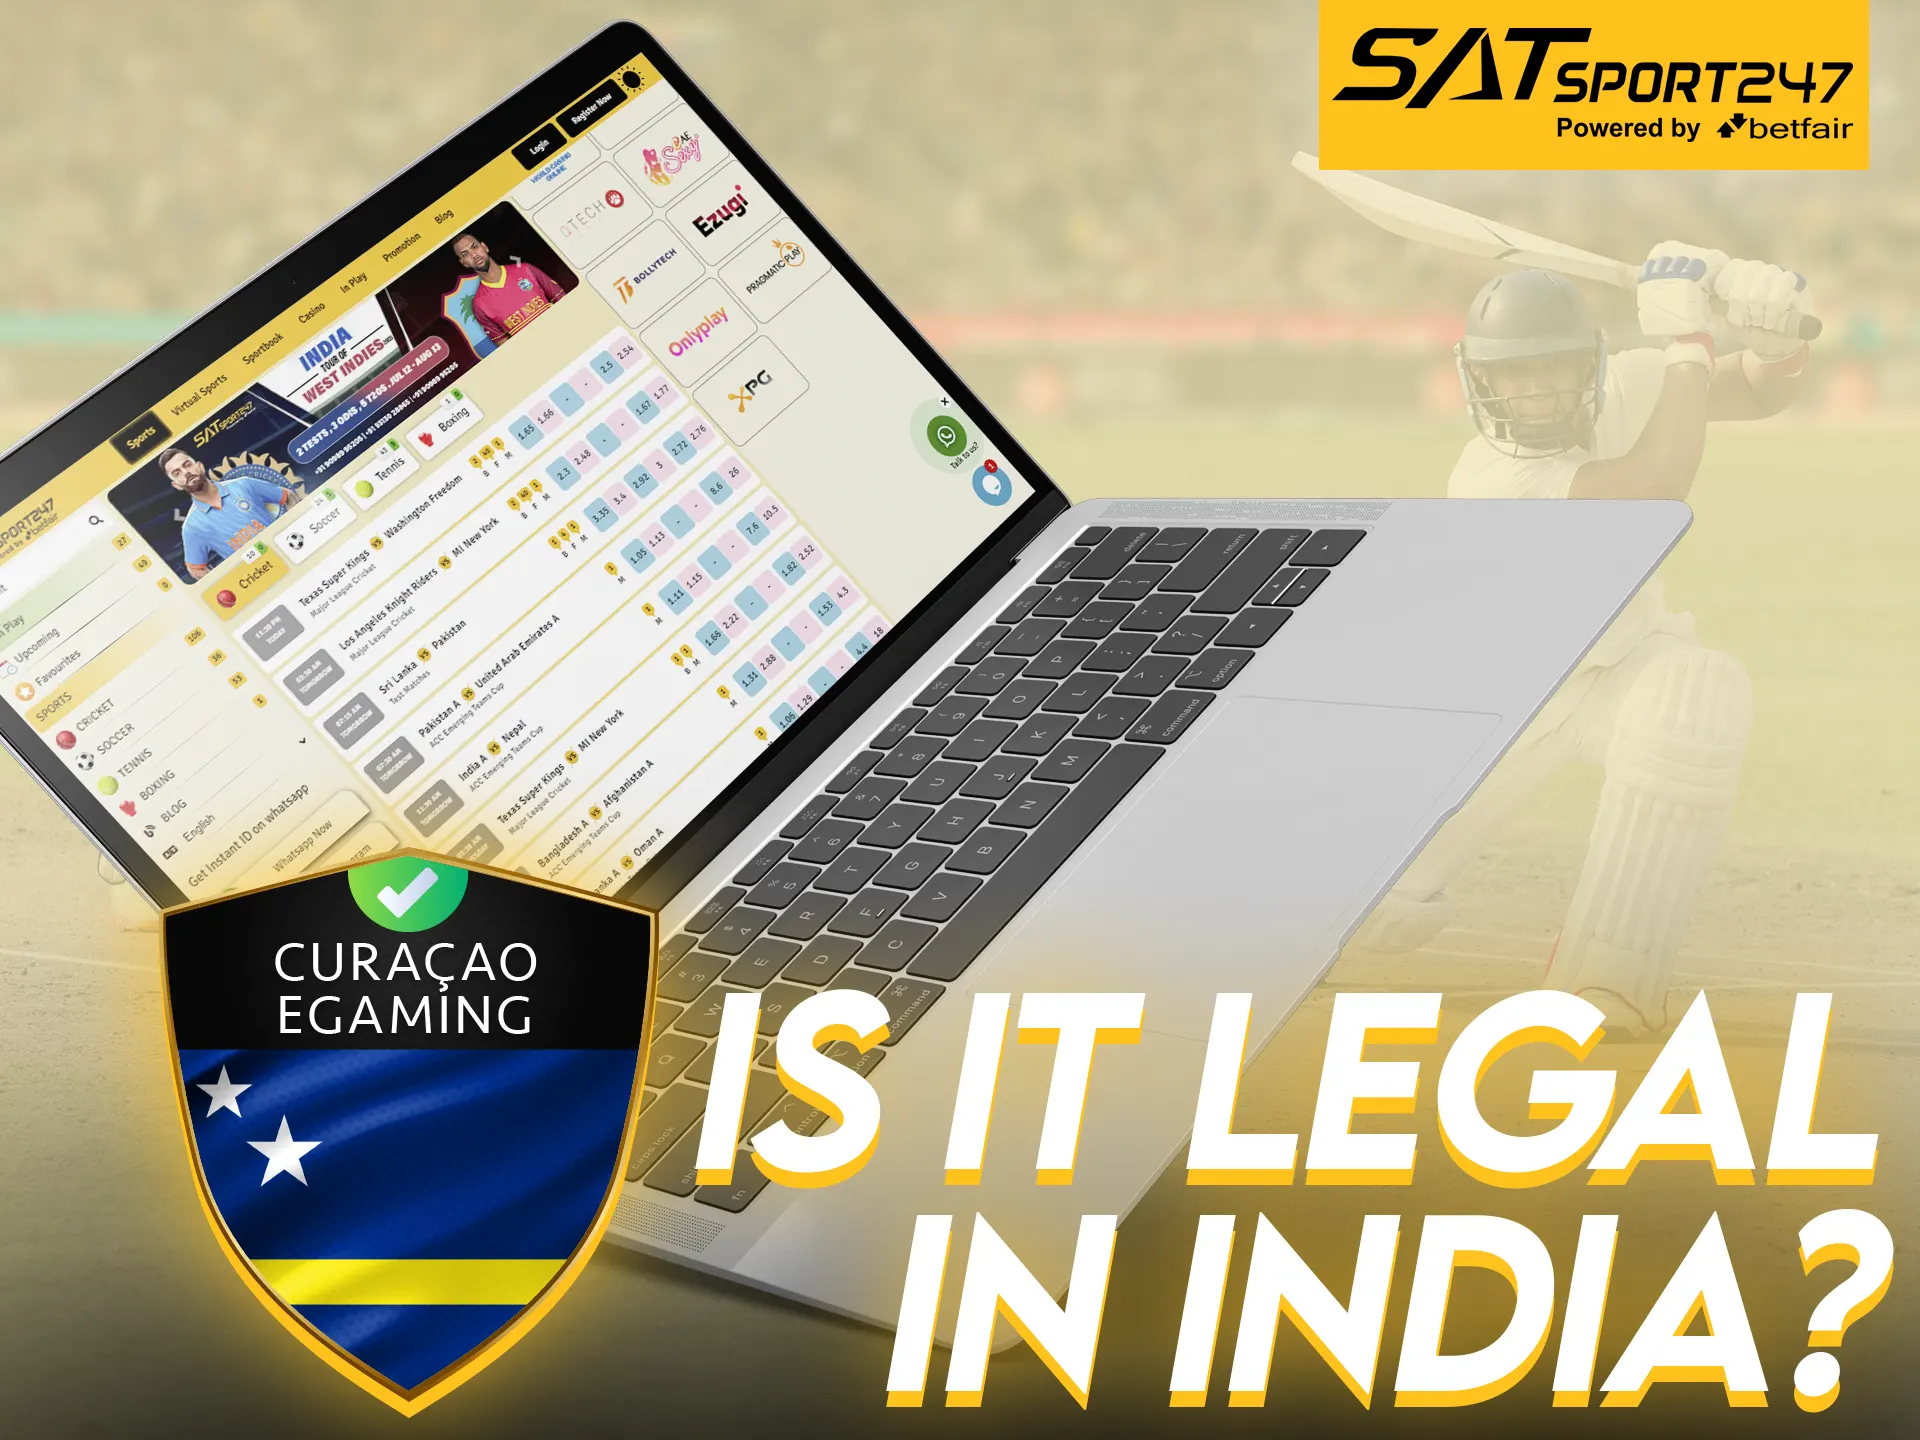 Satsport247 is legal and safe for players in India.